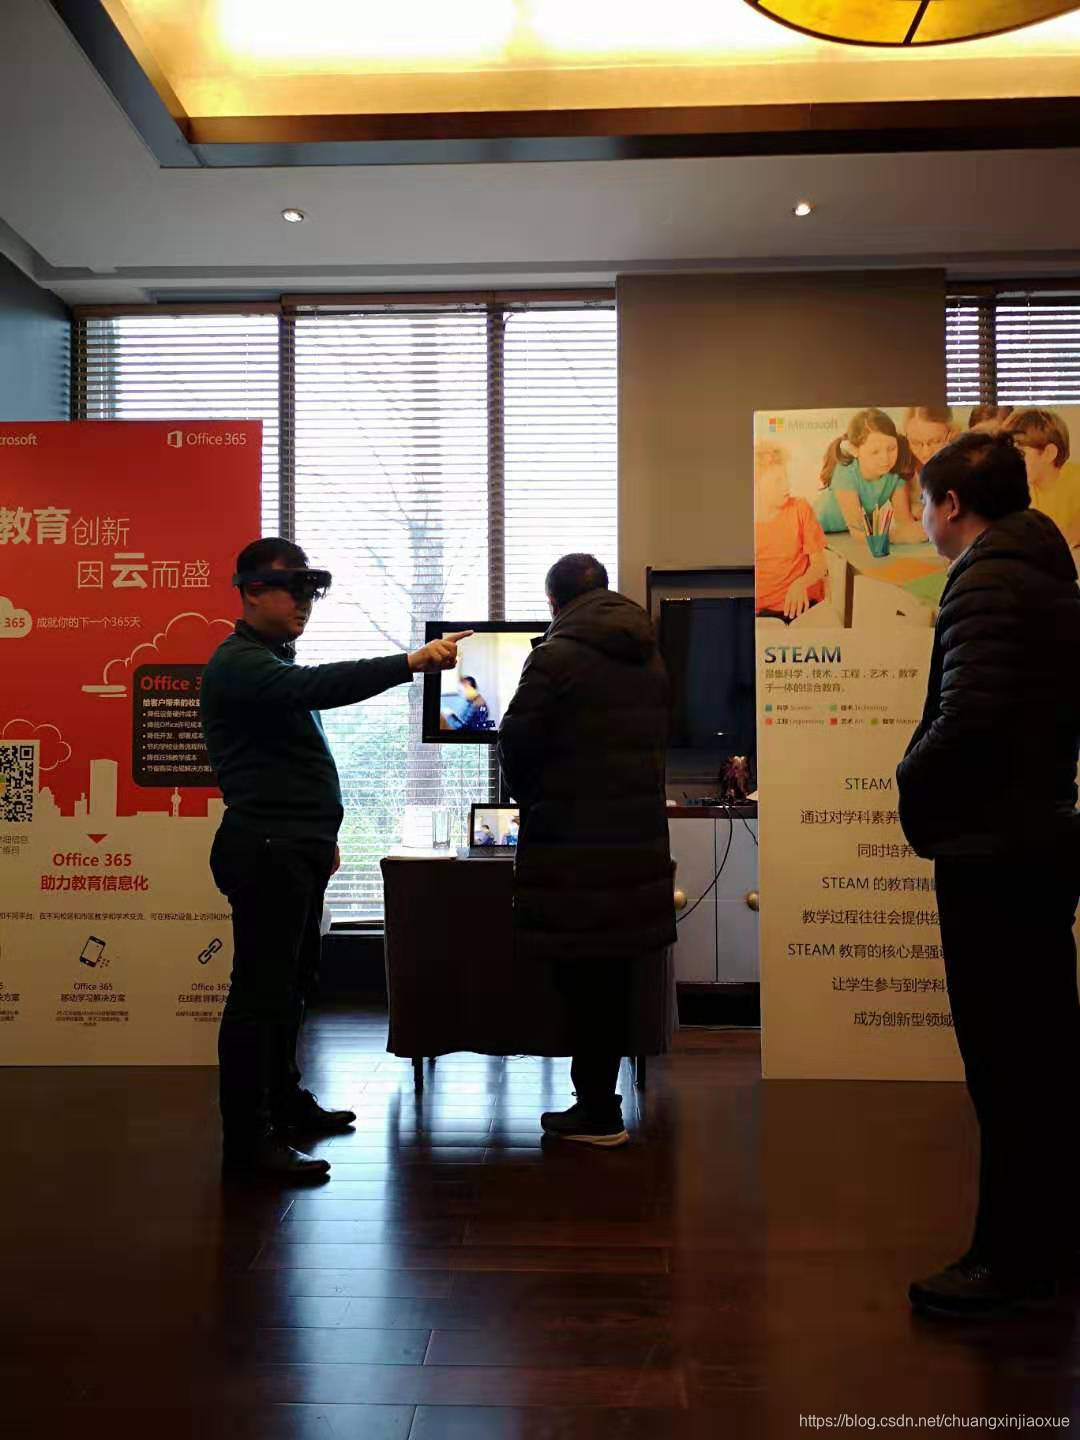 MR Technology Equipment Hololens Application Exhibition and Exchange